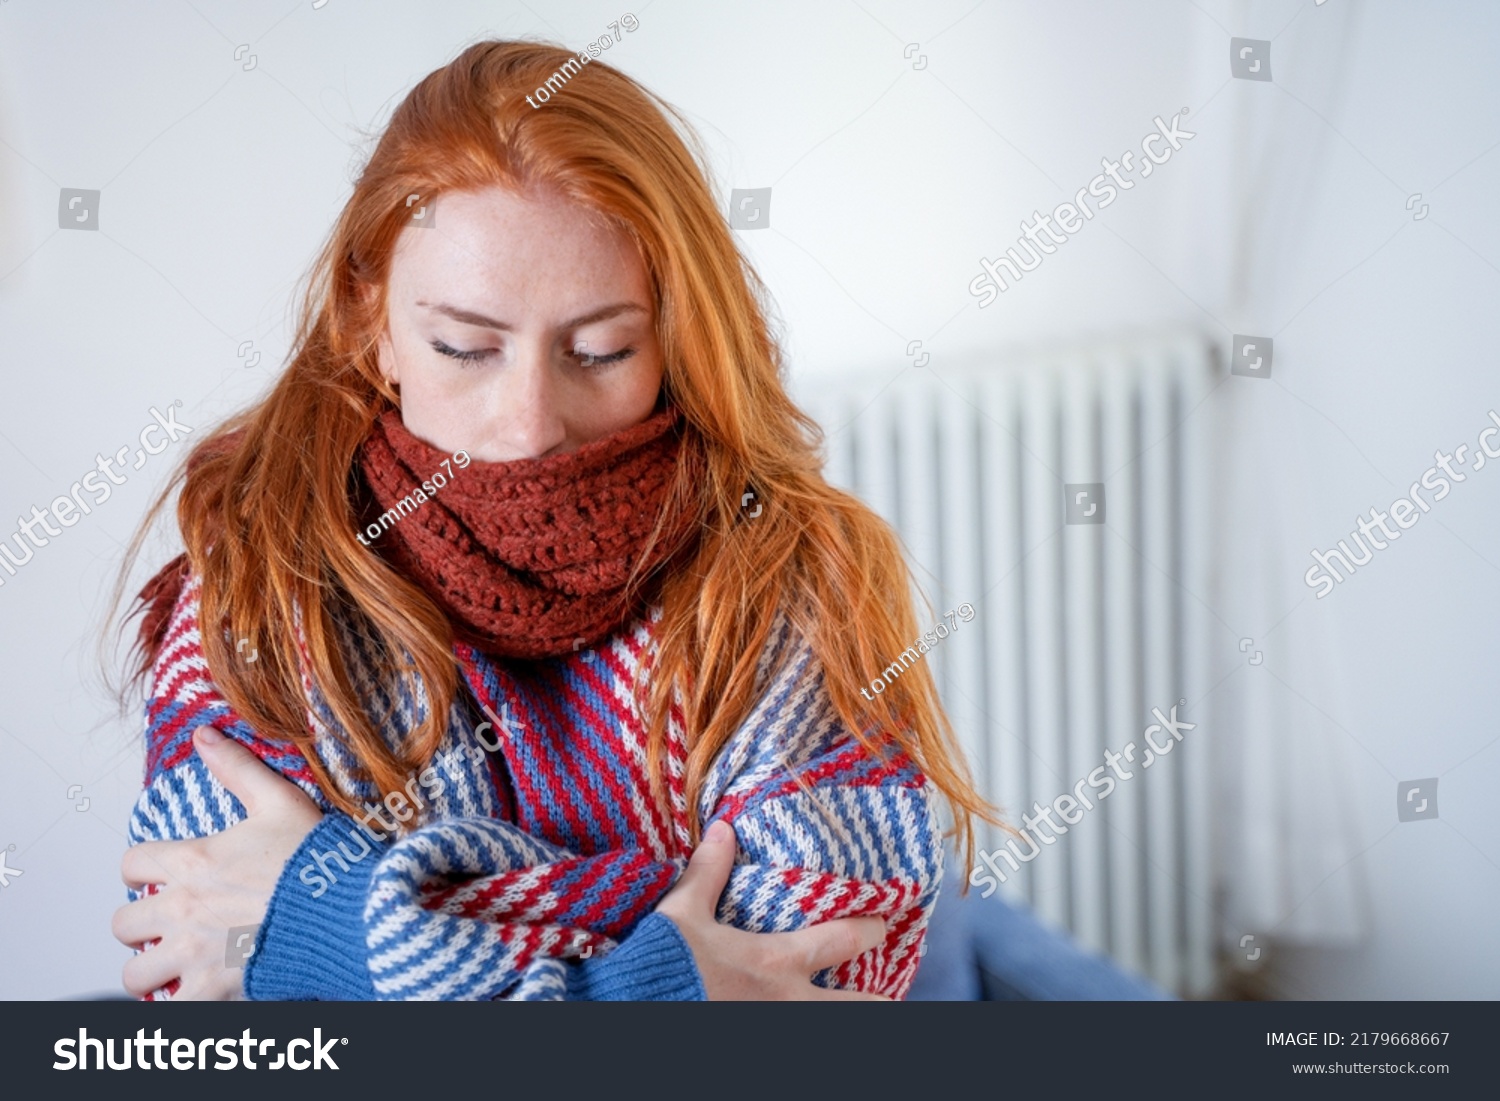 One person feeling cold at home having heating problem #2179668667